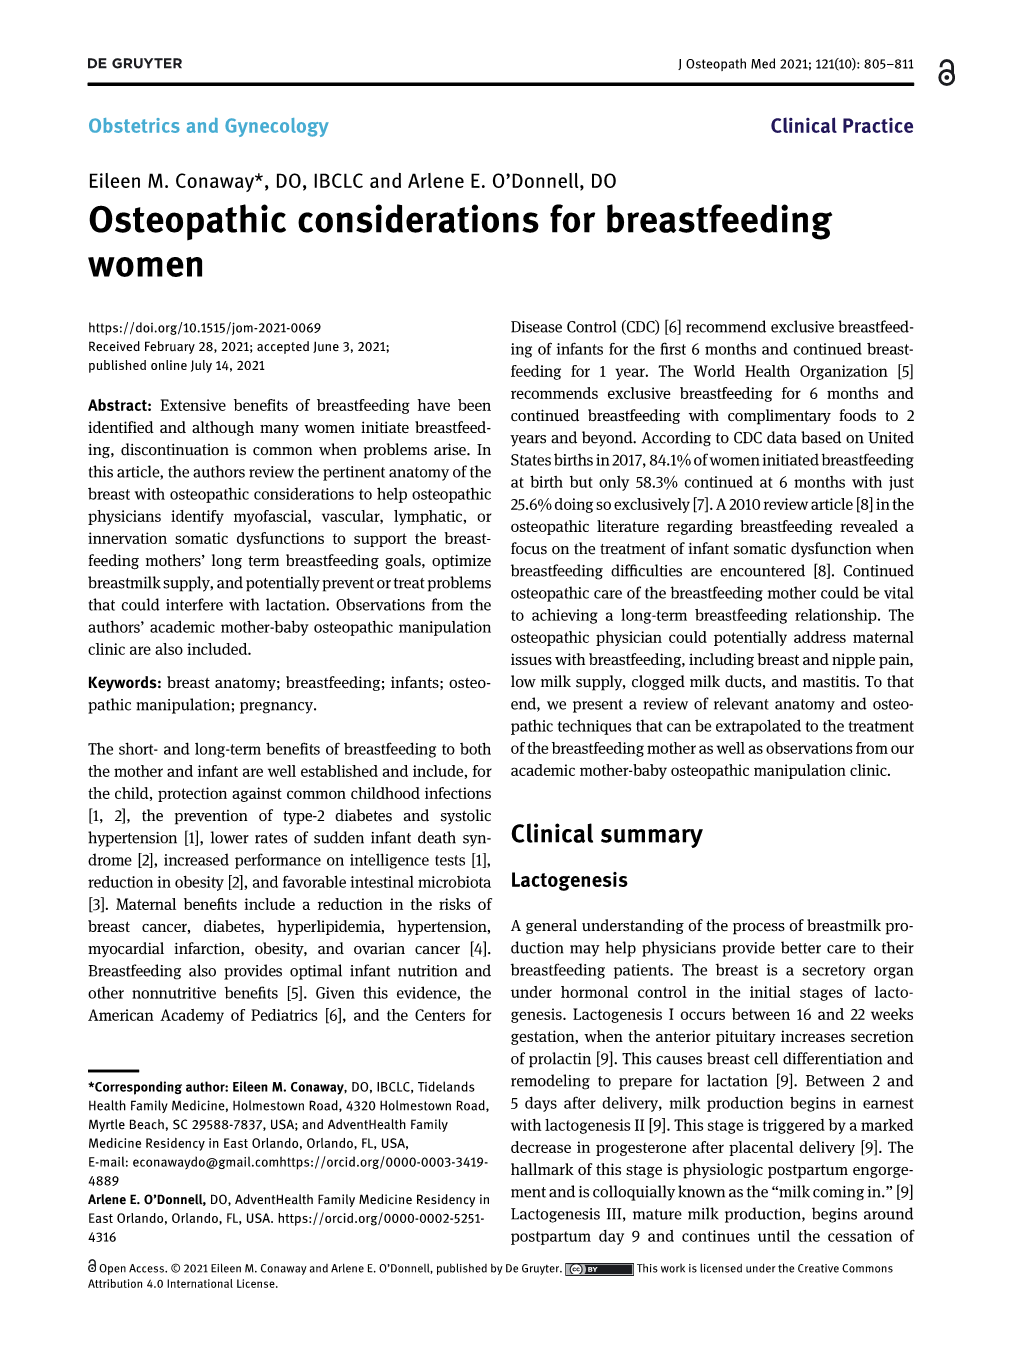 Osteopathic Considerations for Breastfeeding Women